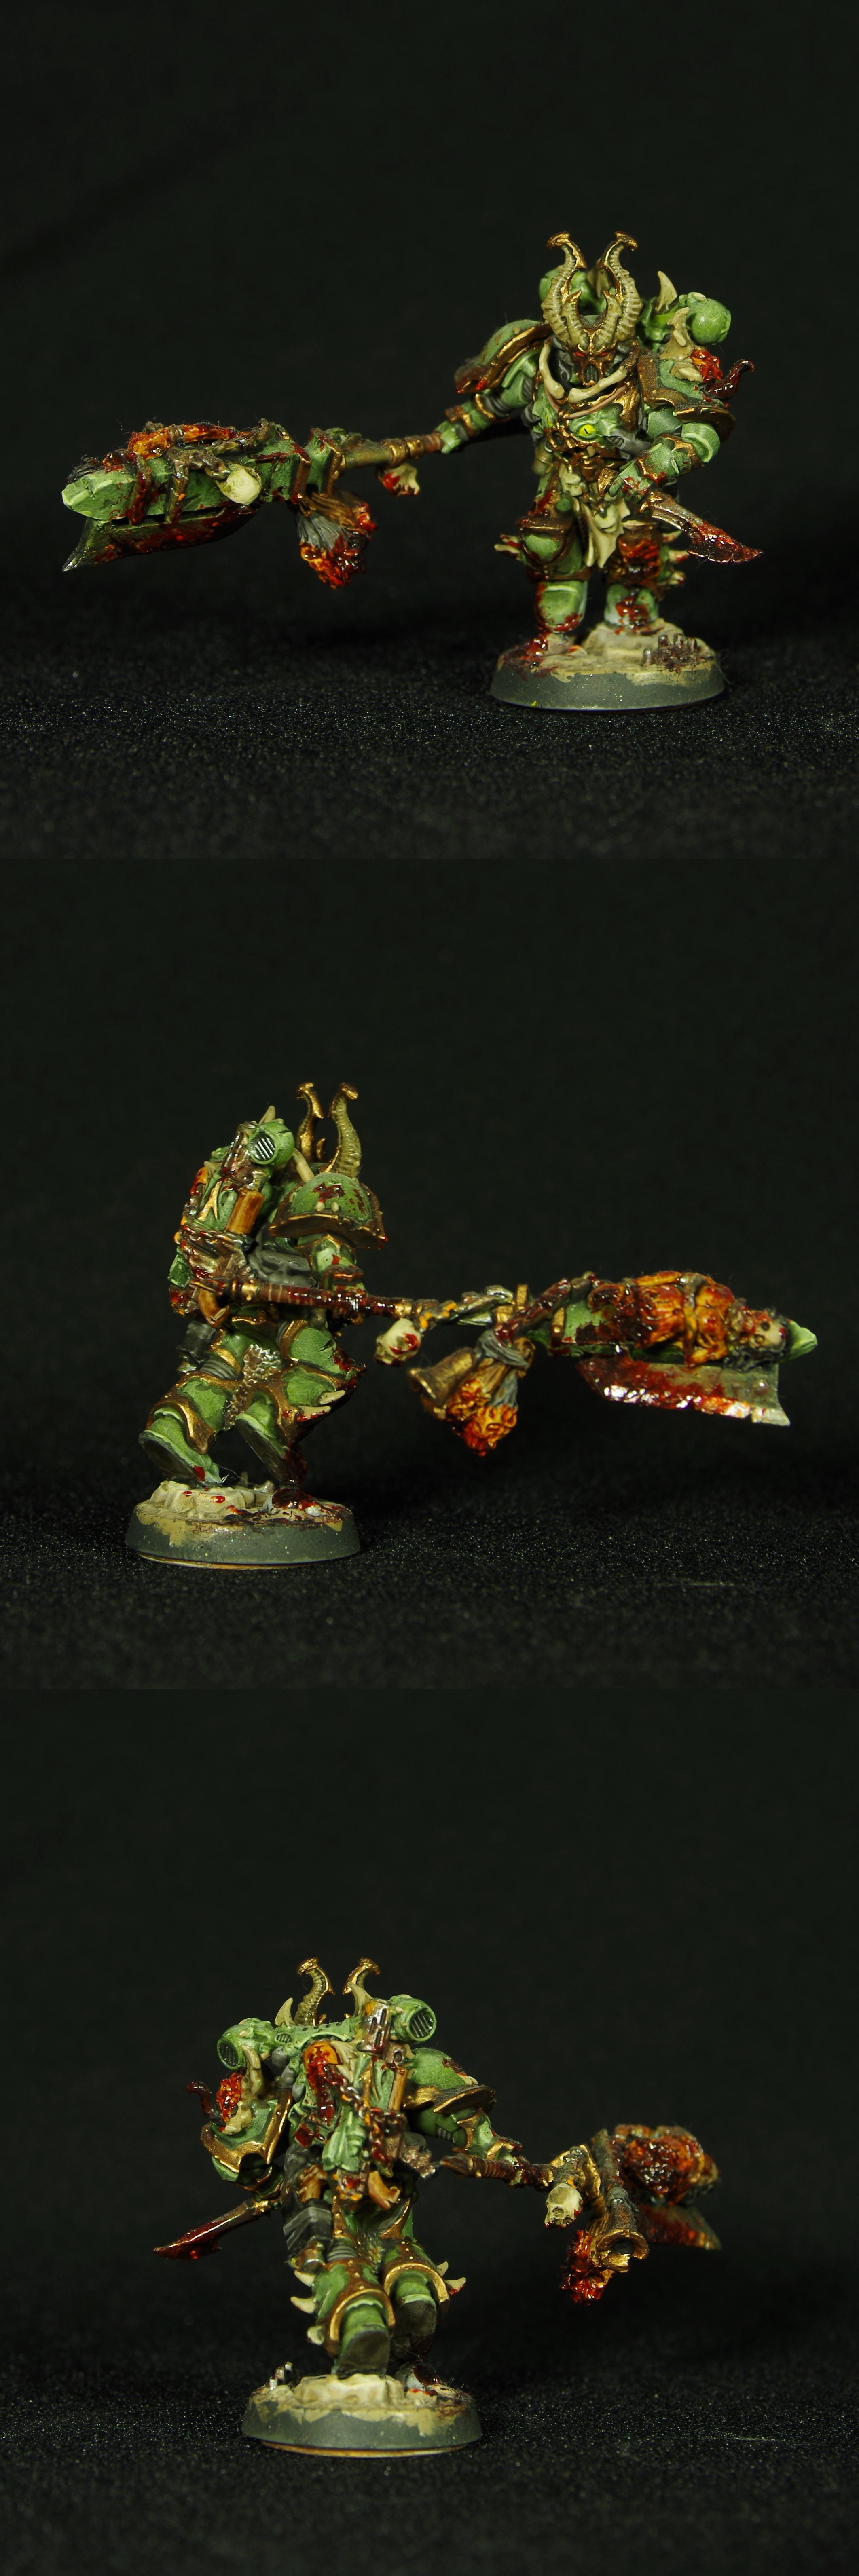 Champion, Chaos, Chaos Space Marines, Conversion, Daemons, Nurgle, Plague, Prince, Space, Space Marines, Standard, Standard Bearer, Warhammer 40,000, Warhammer Fantasy, Wh40